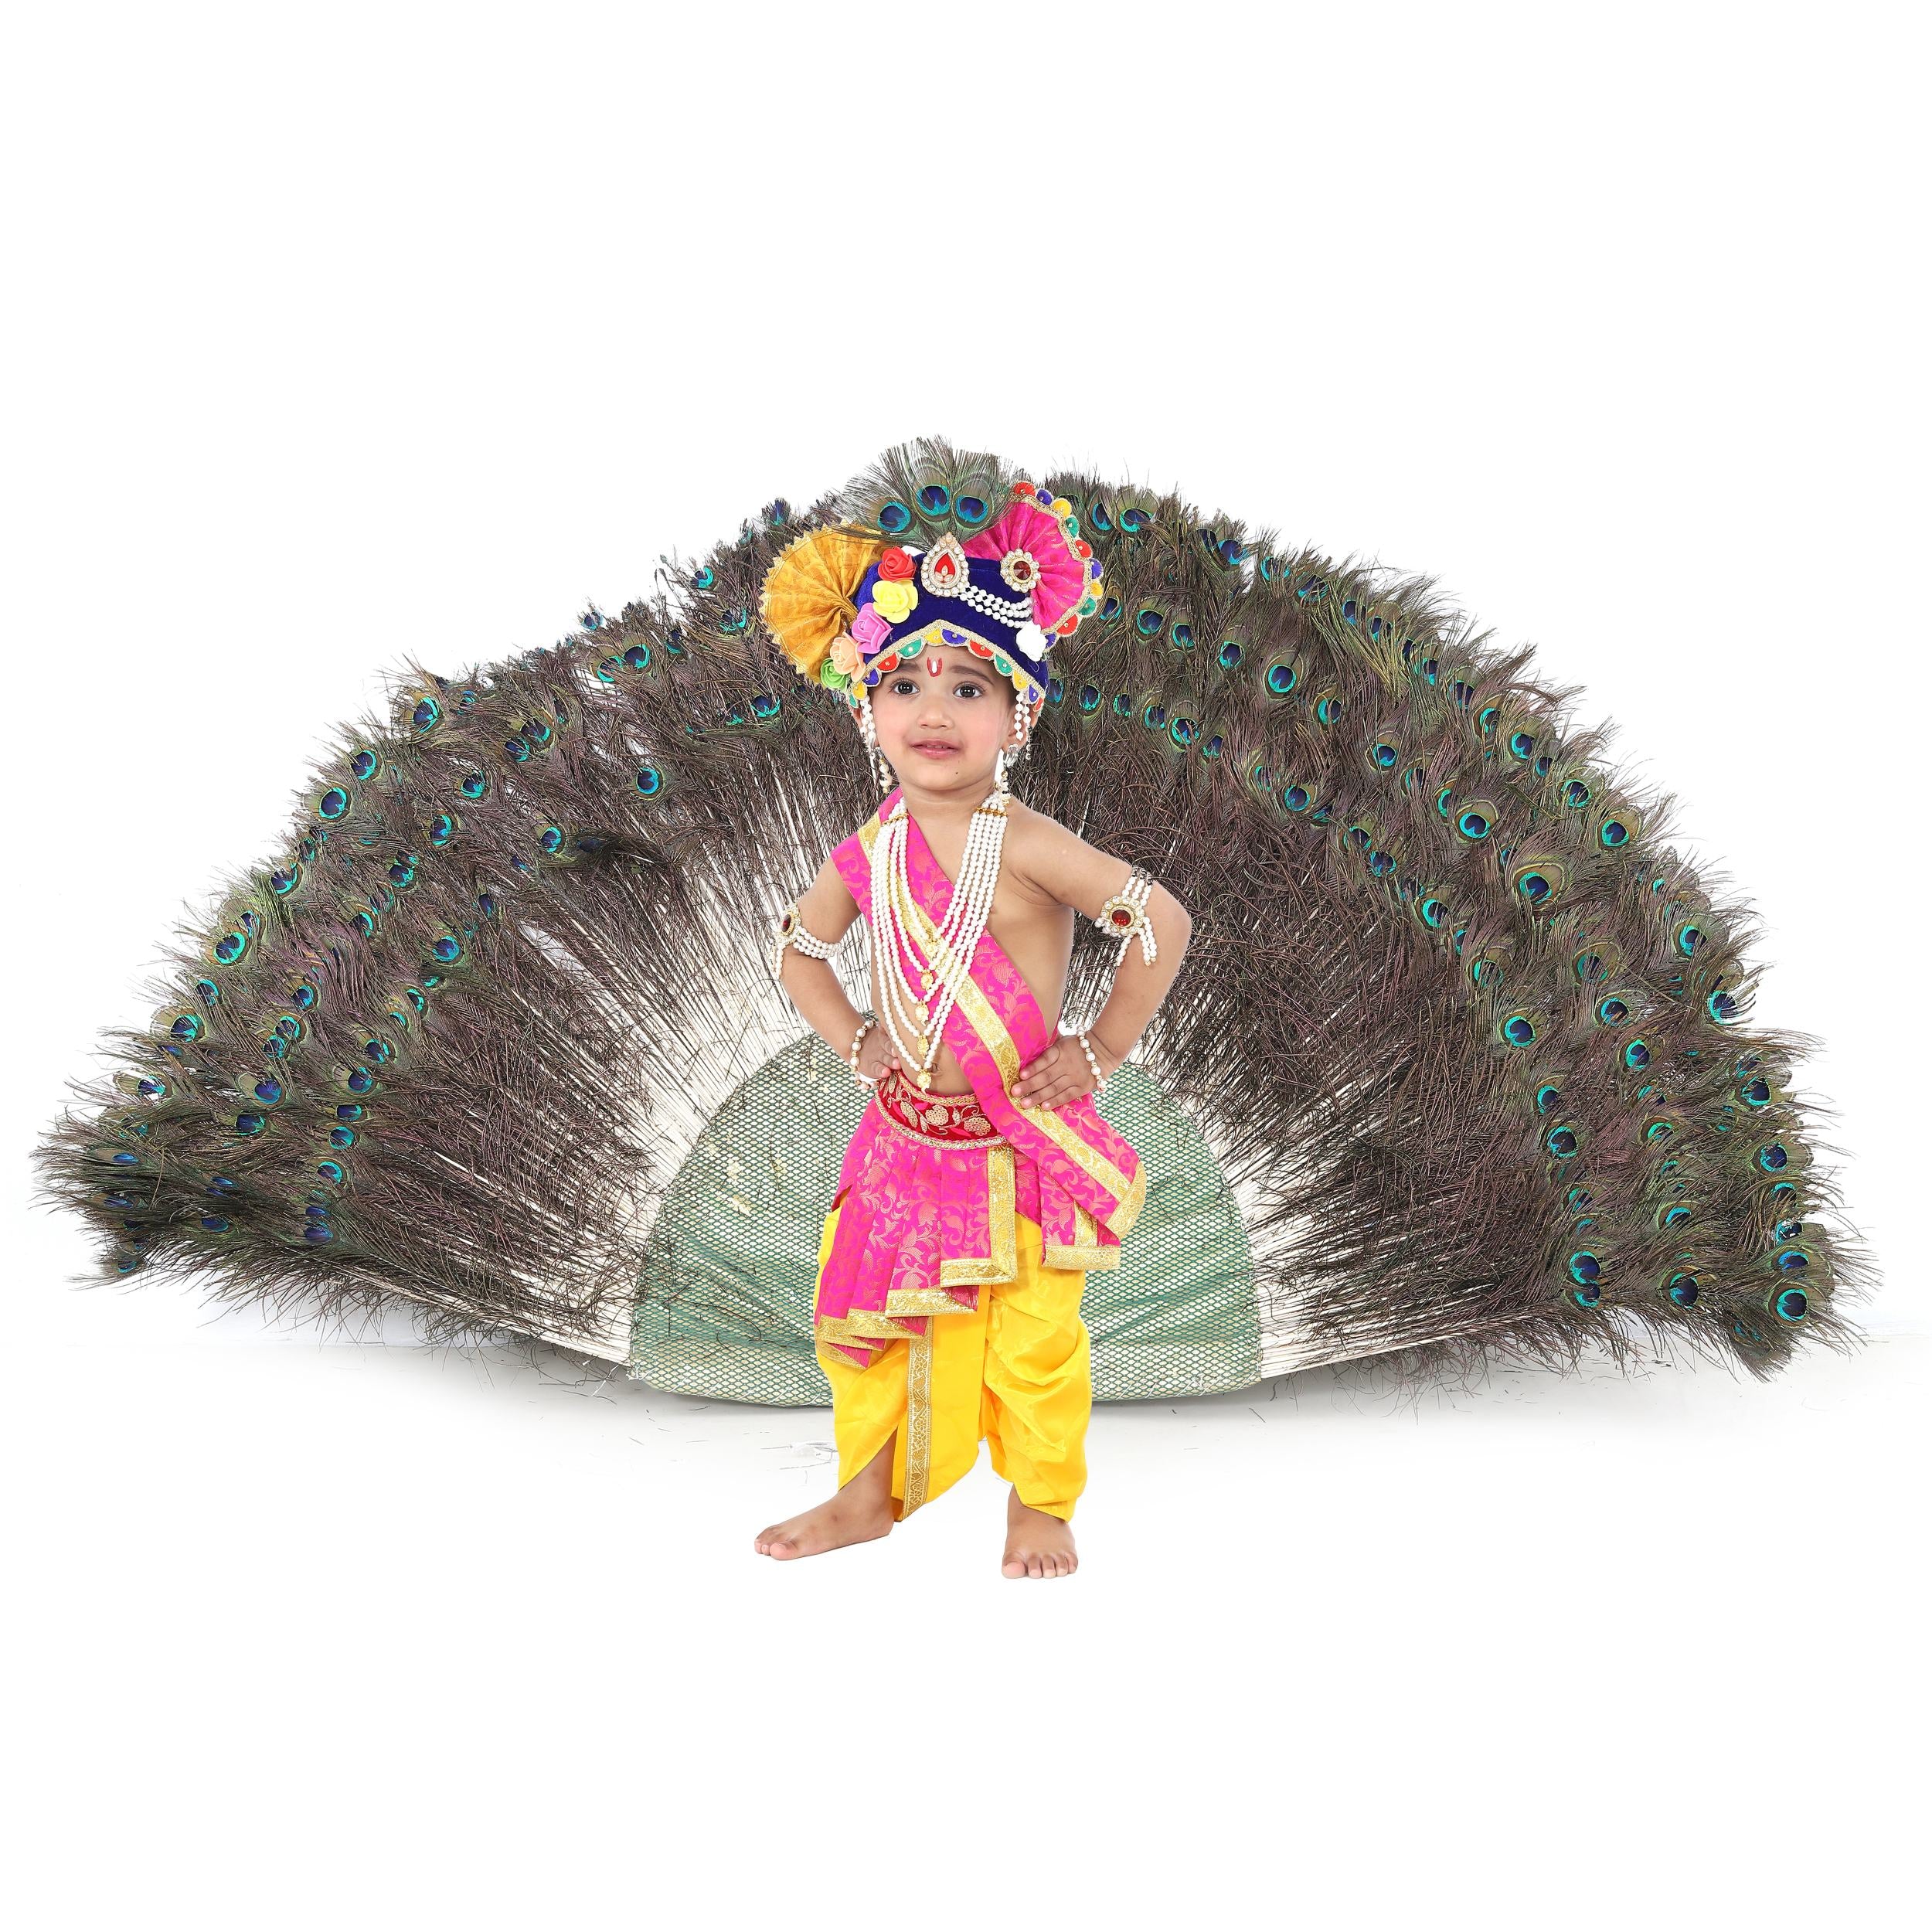 Children dressed in Krishna and Radha costumes taking part in the fancy  dress competition at ISKCON during Krishna Janmashtami celebration in  Bangalore on August 23, 2008 - Photogallery